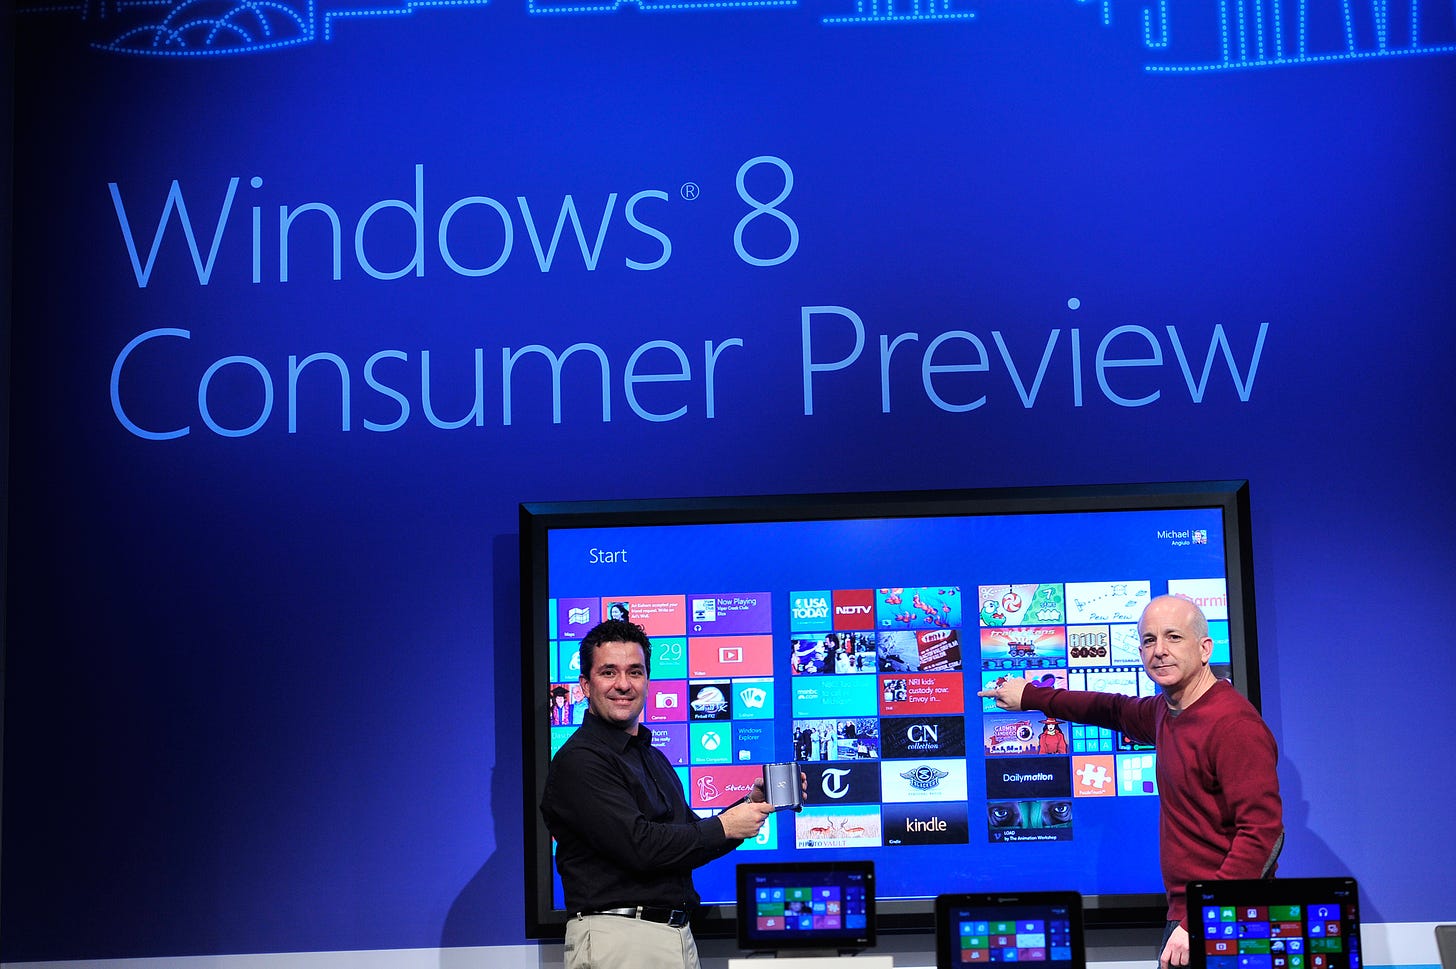 Photos shows the 82" touch screen computer running windows 8. the background features a large "Windows 8 Consumer Preview" projection.